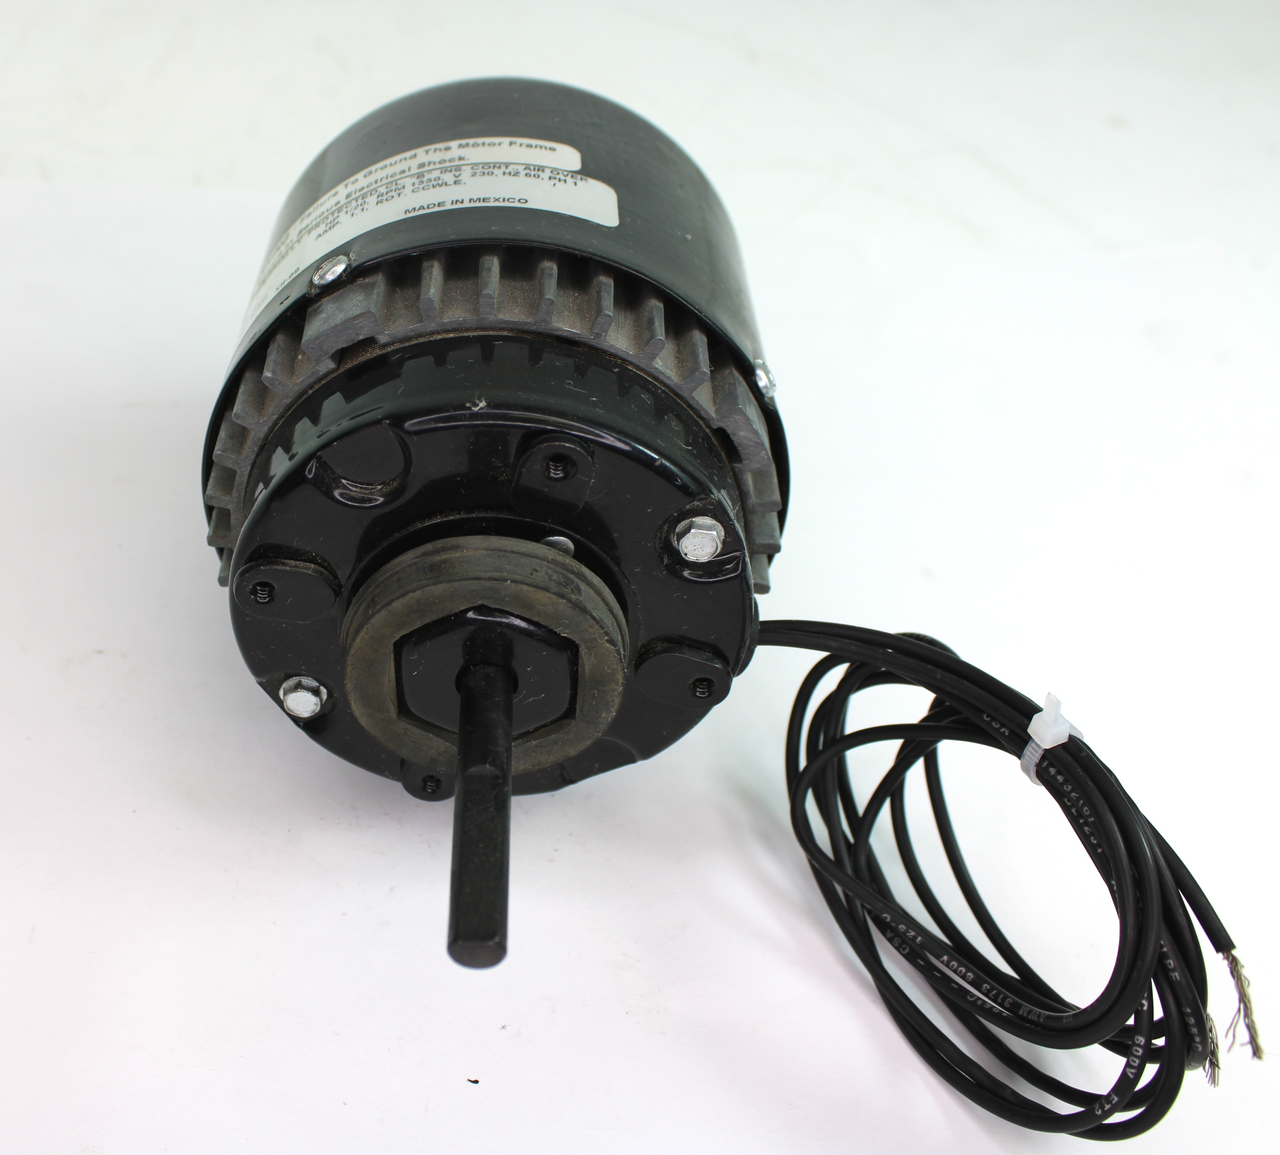 Packard Electric 81332 Electric Motor 1/20Hp 1550RPM 230V 60Hz 1Phase 1.1A